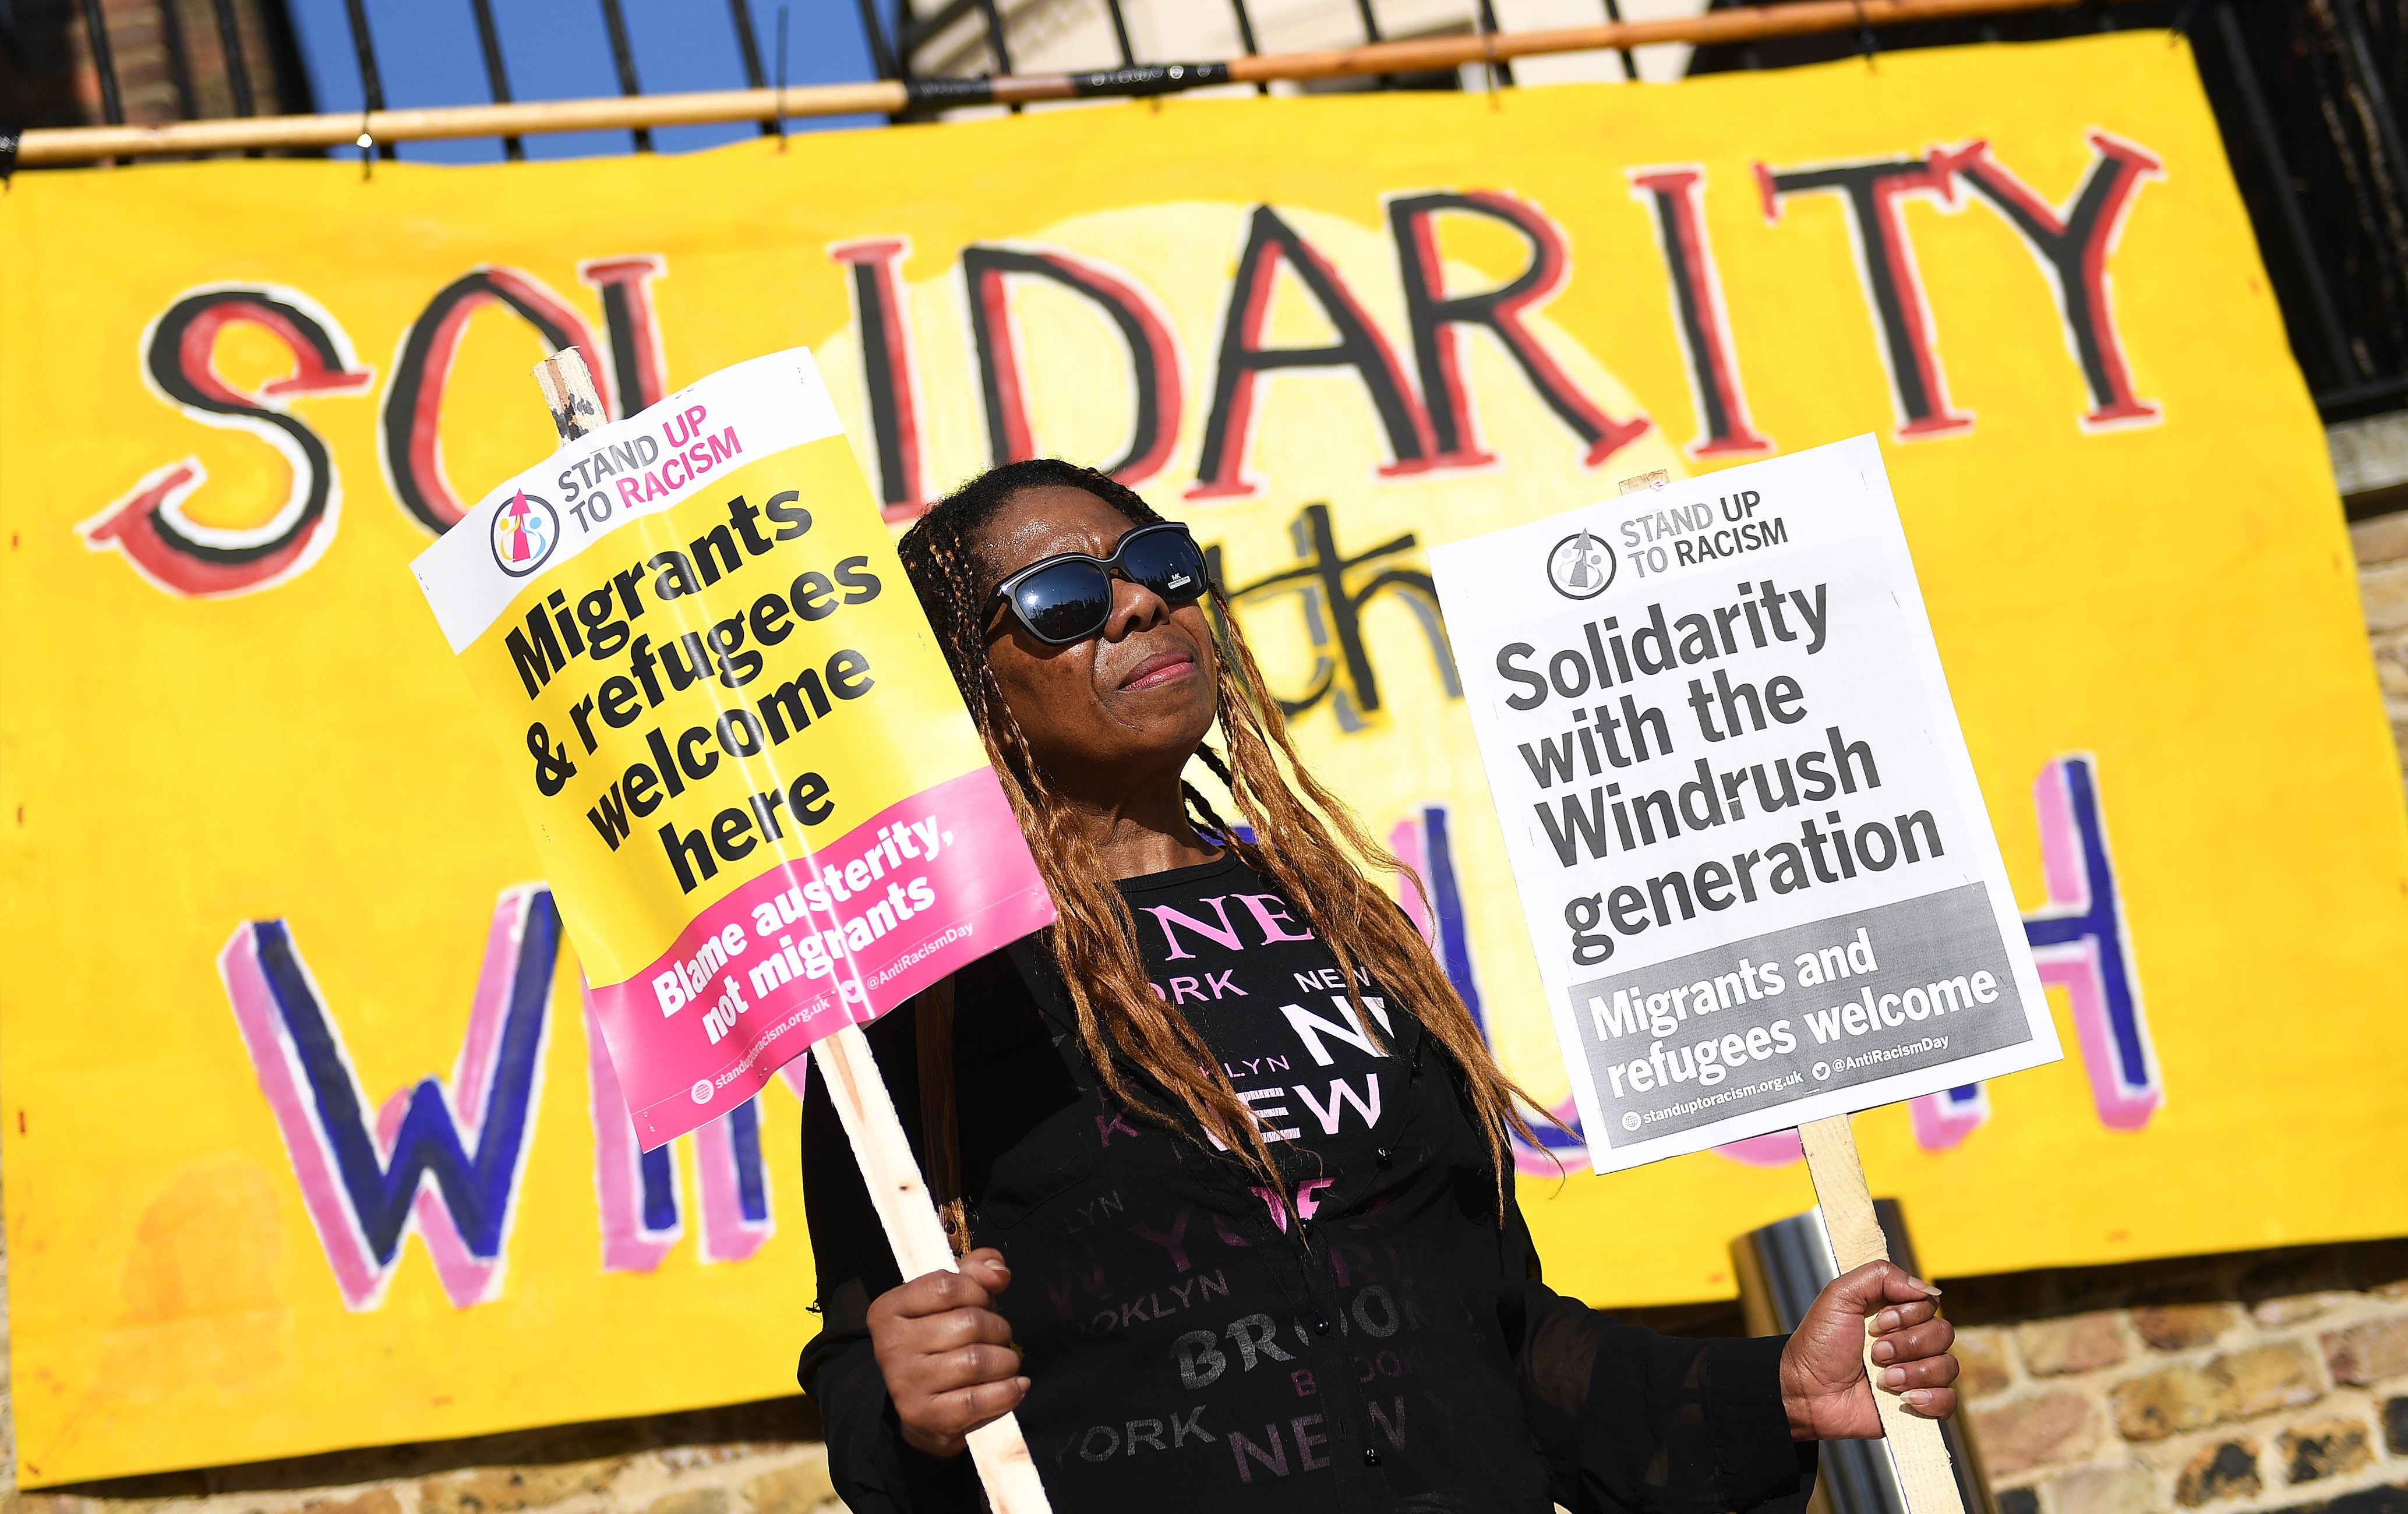 A woman gathers for a Windrush generation solidarity protest in Brixton, 20 April, 2018